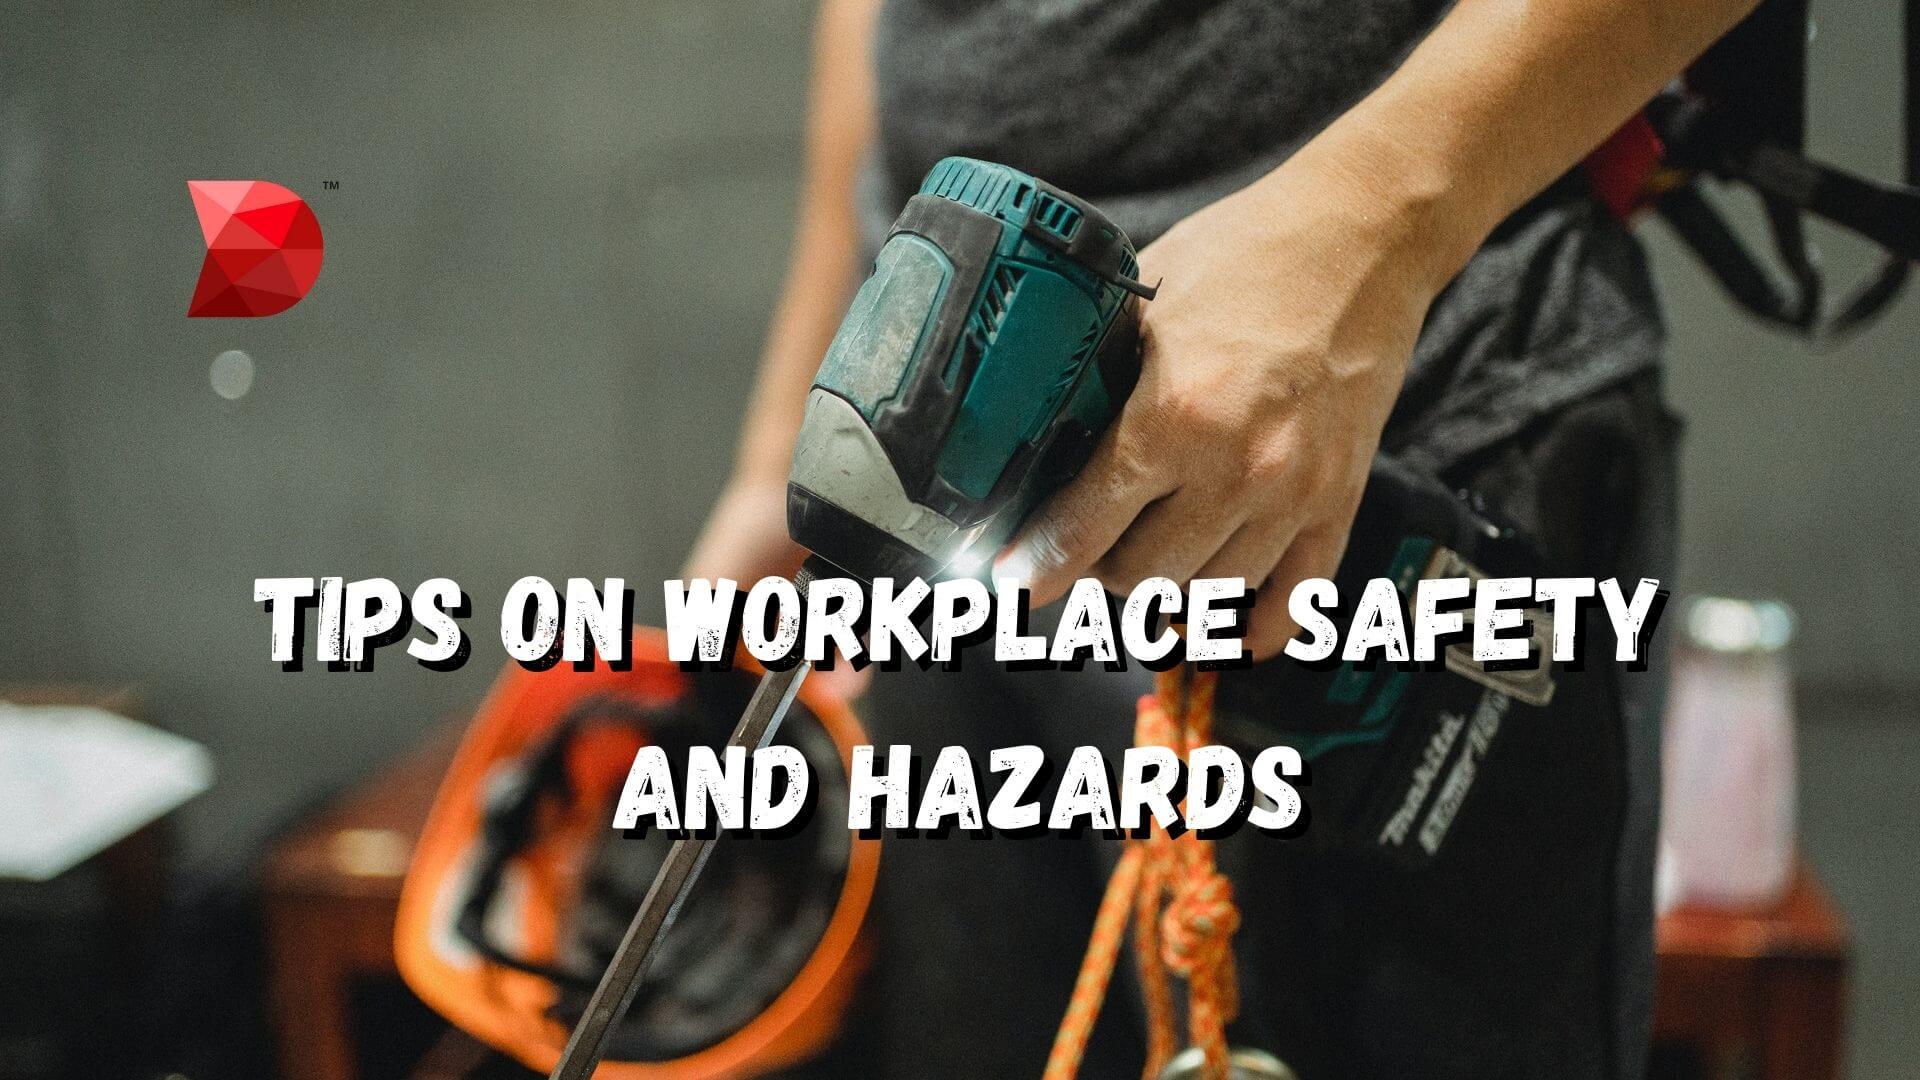 Tips on Workplace Safety and Hazards